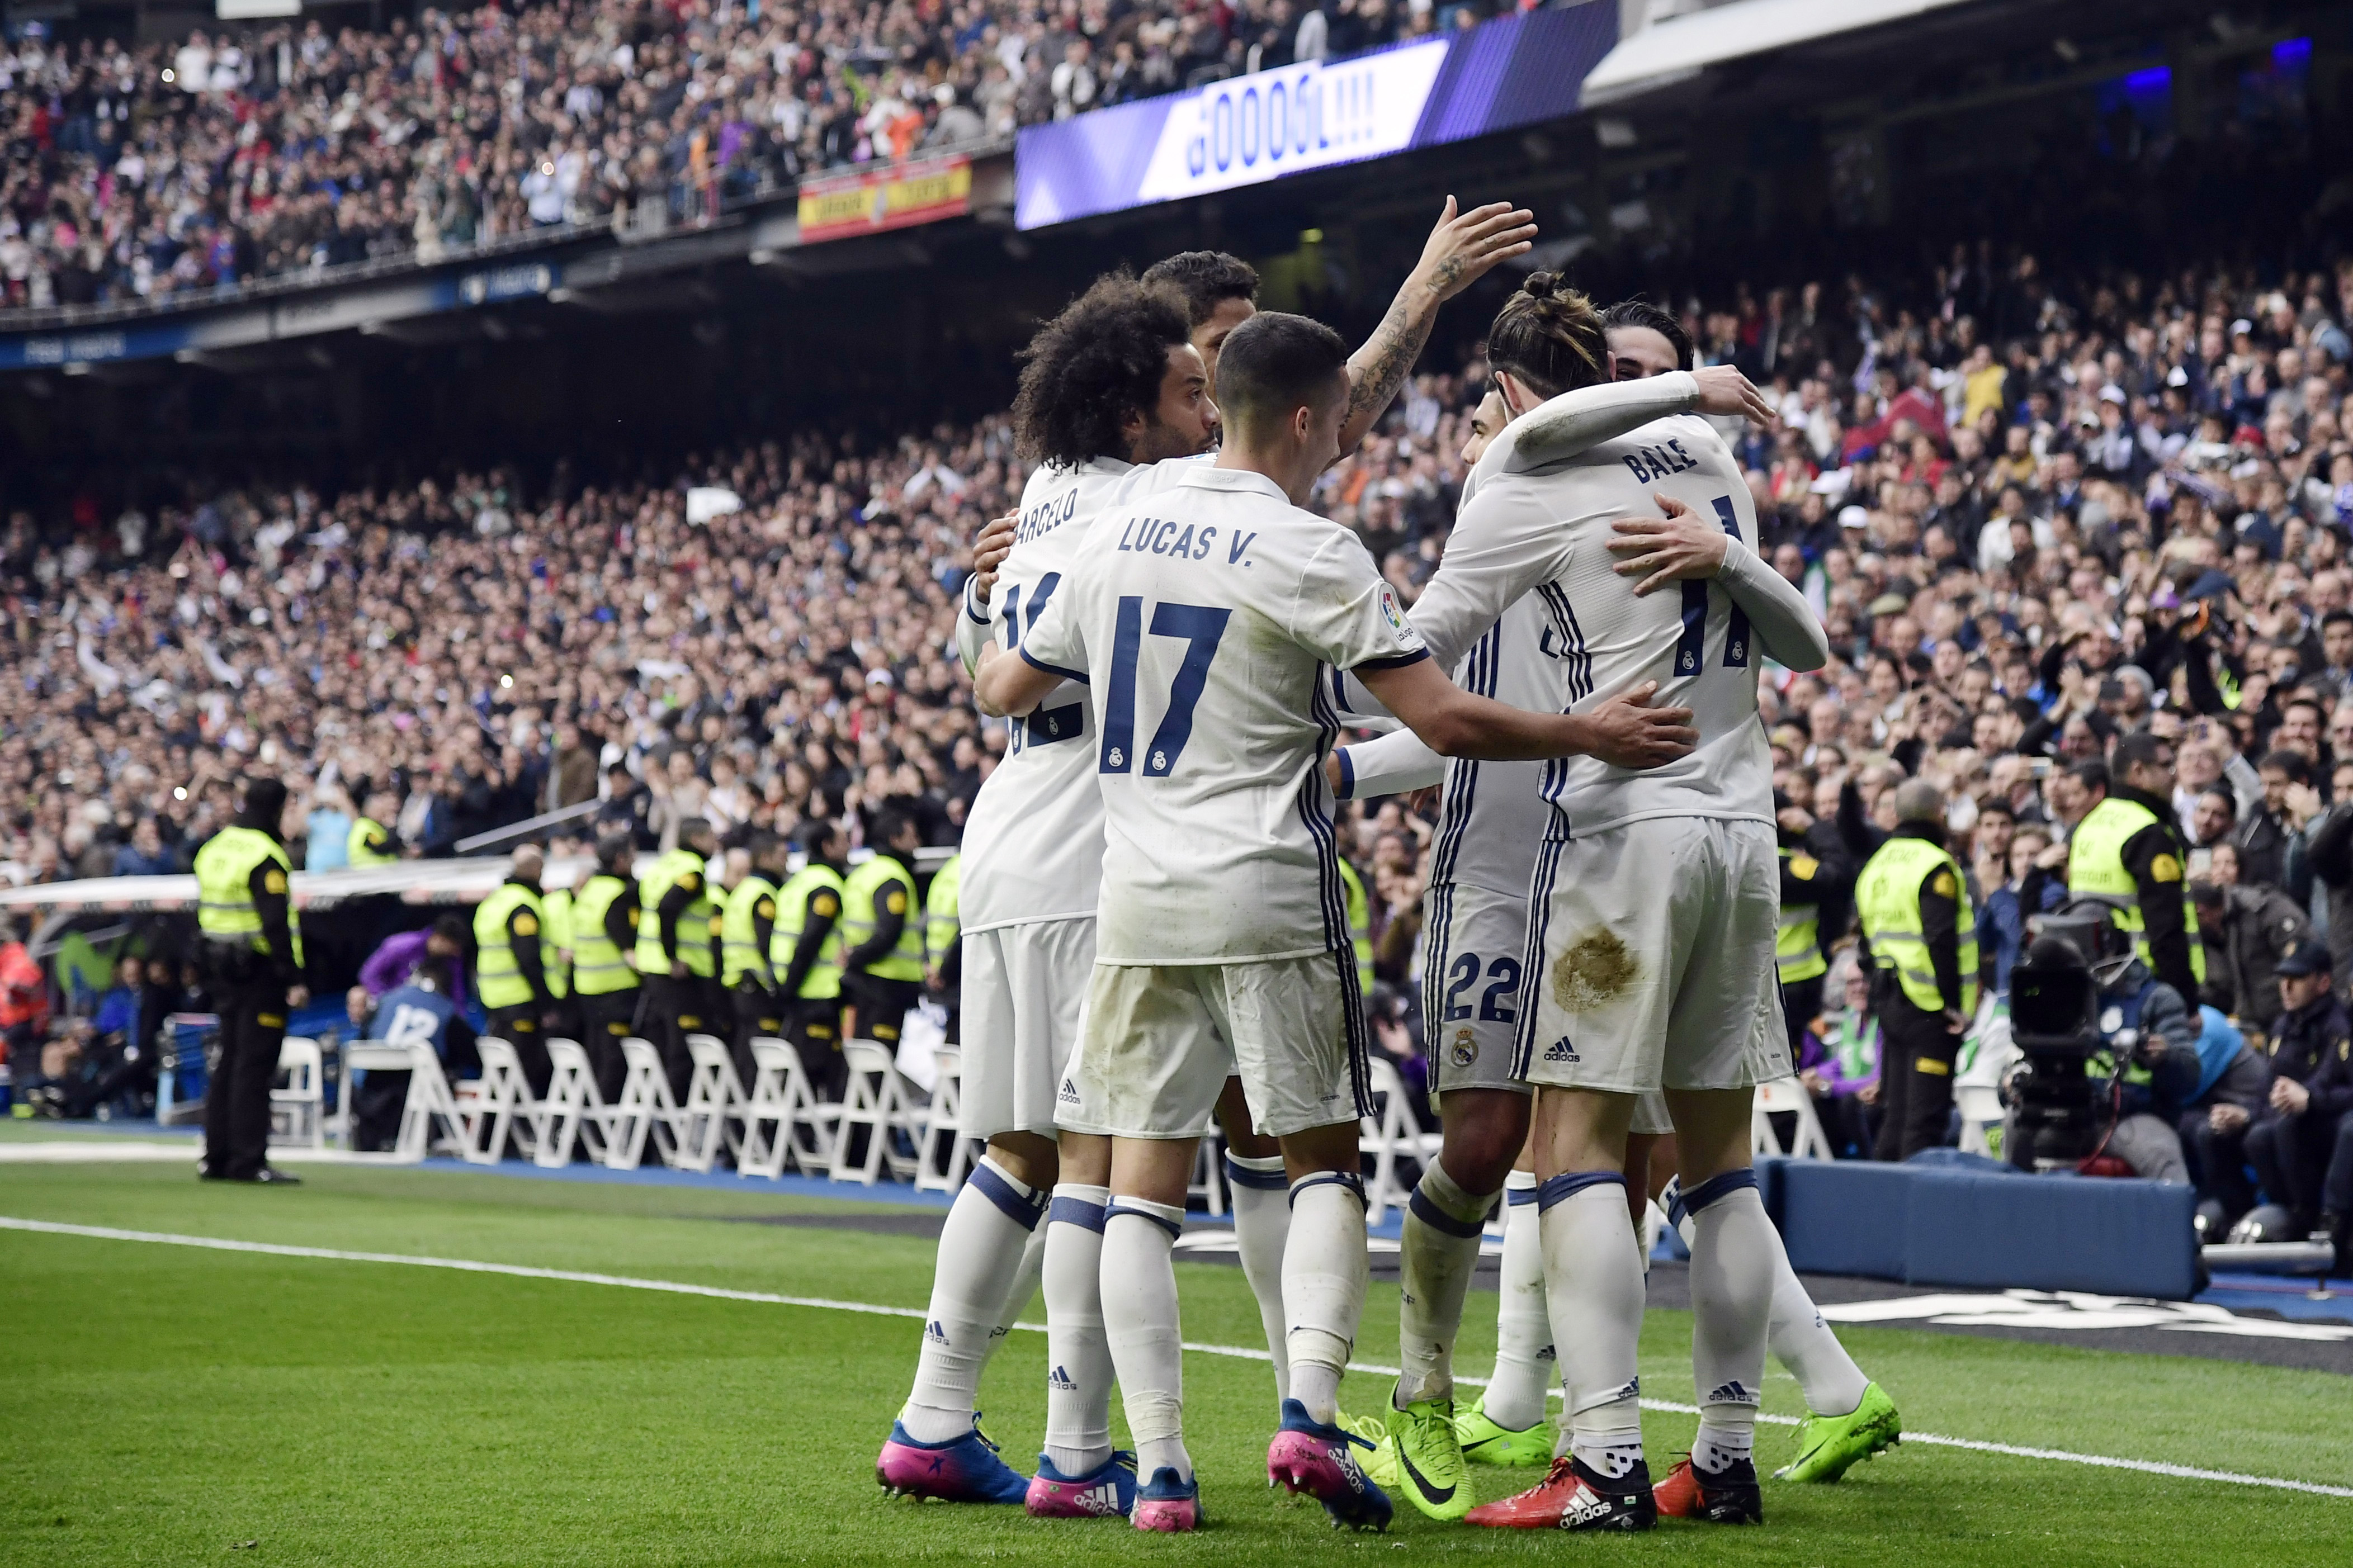 Real Madrid players celebrate a goal during the Spanish league football match Real Madrid CF vs RCD Espanyol at the Santiago Bernabeu stadium in Madrid on February 18, 2017. / AFP PHOTO / JAVIER SORIANO